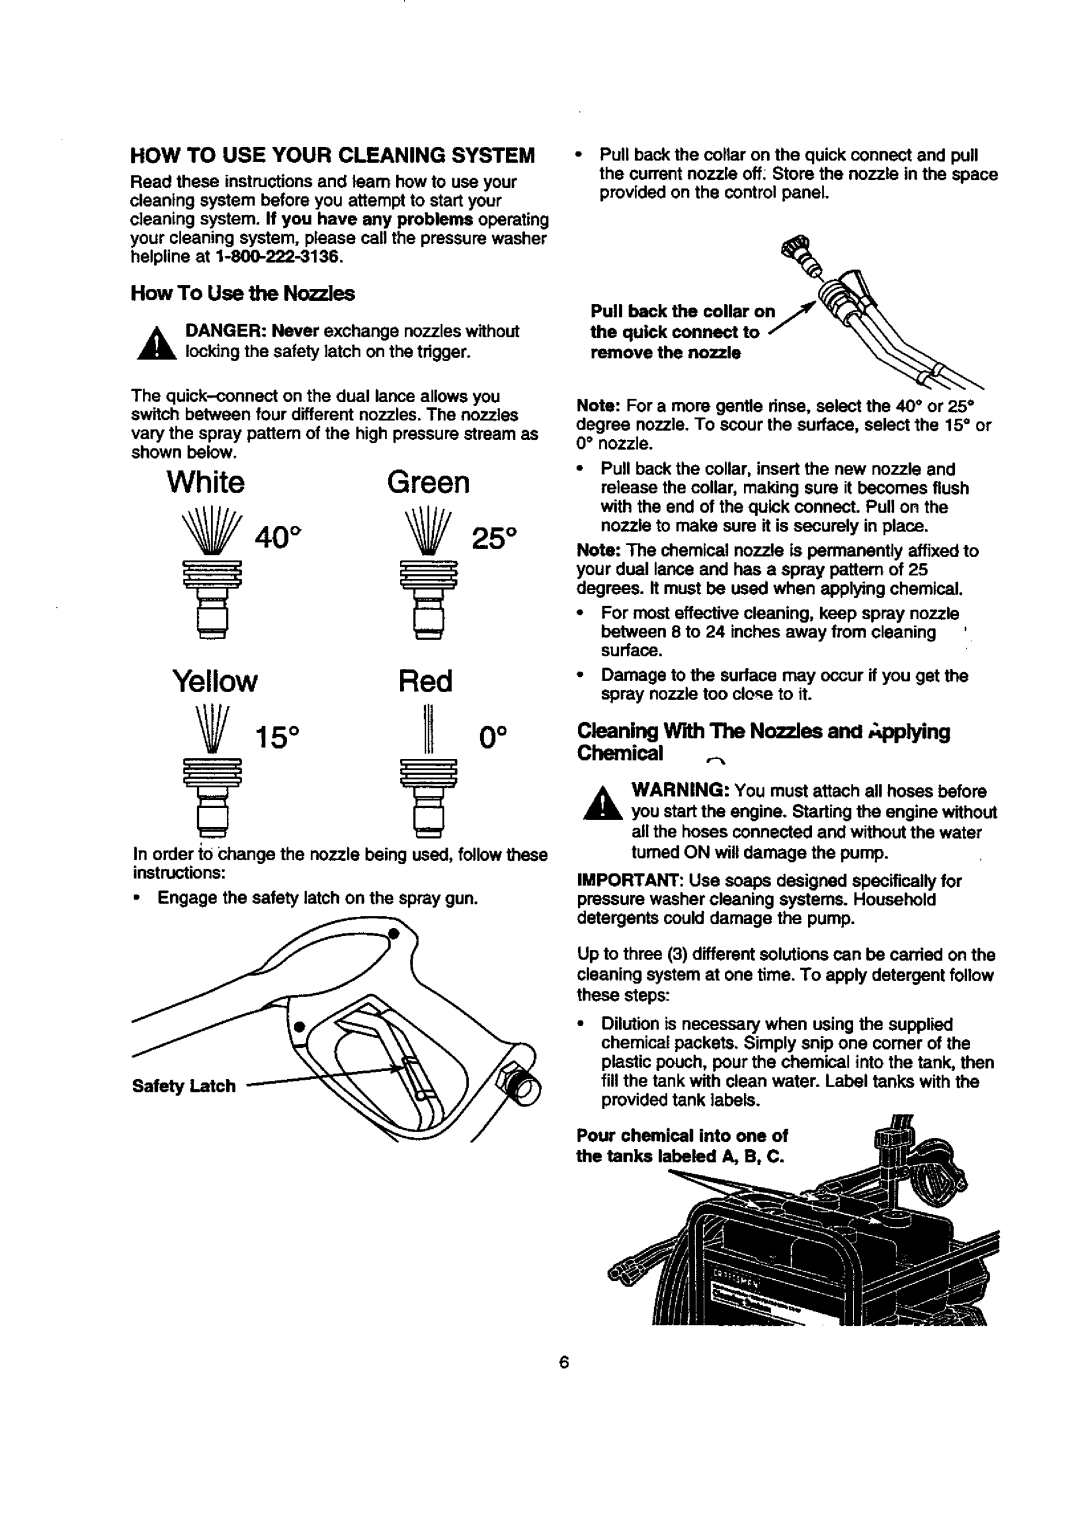 Sears 580.768050 manual WhiteGreen YellowRed, How To Use Your Cleaning System, How To Use the NozTJes 